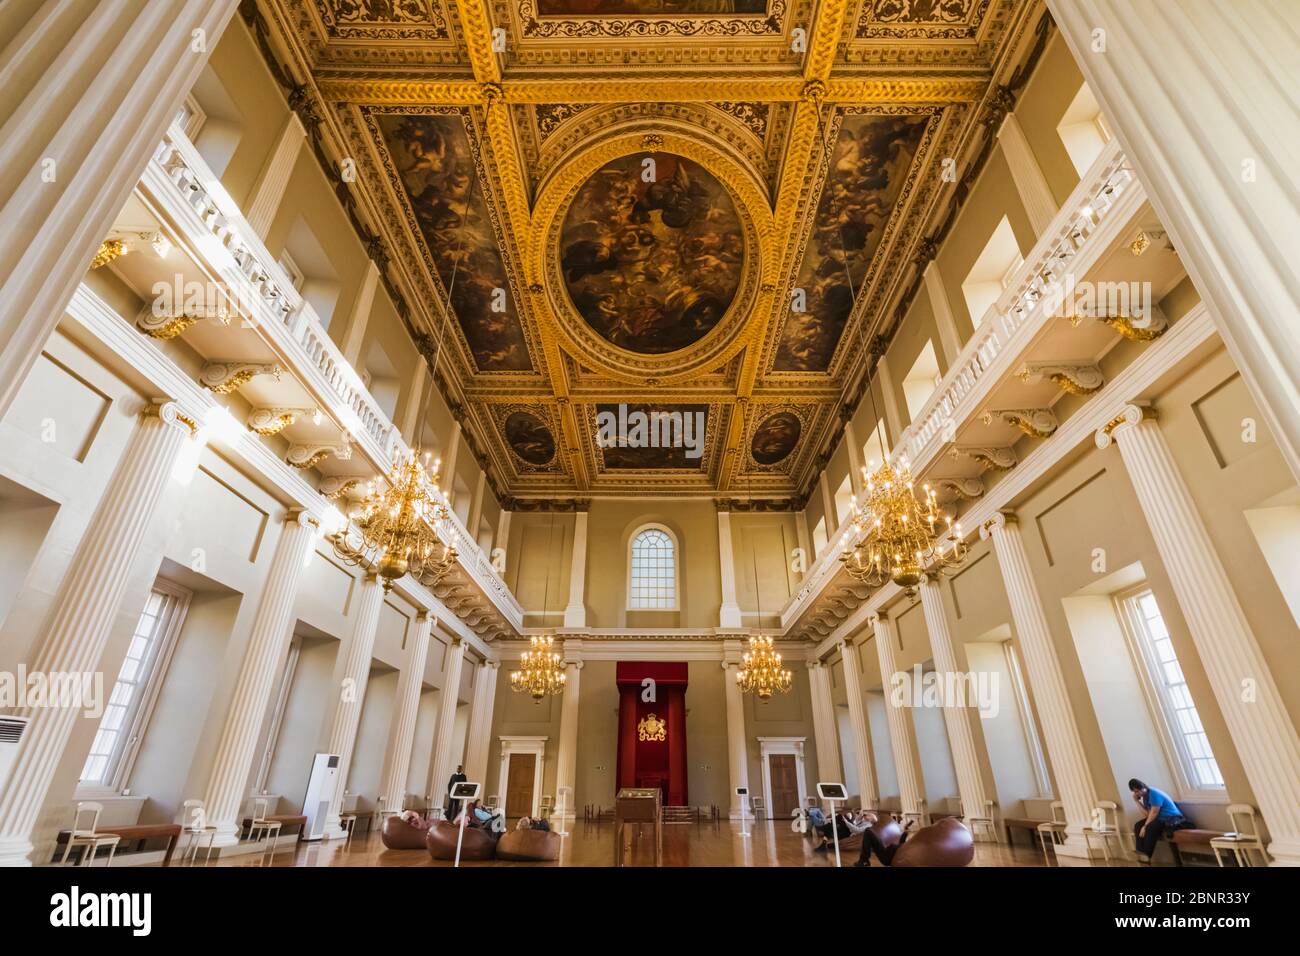 England, London, Westminster, Whitehall, The Banqueting Hall designed by Inigo Jones with Ceiling Paintings by Rubens Stock Photo